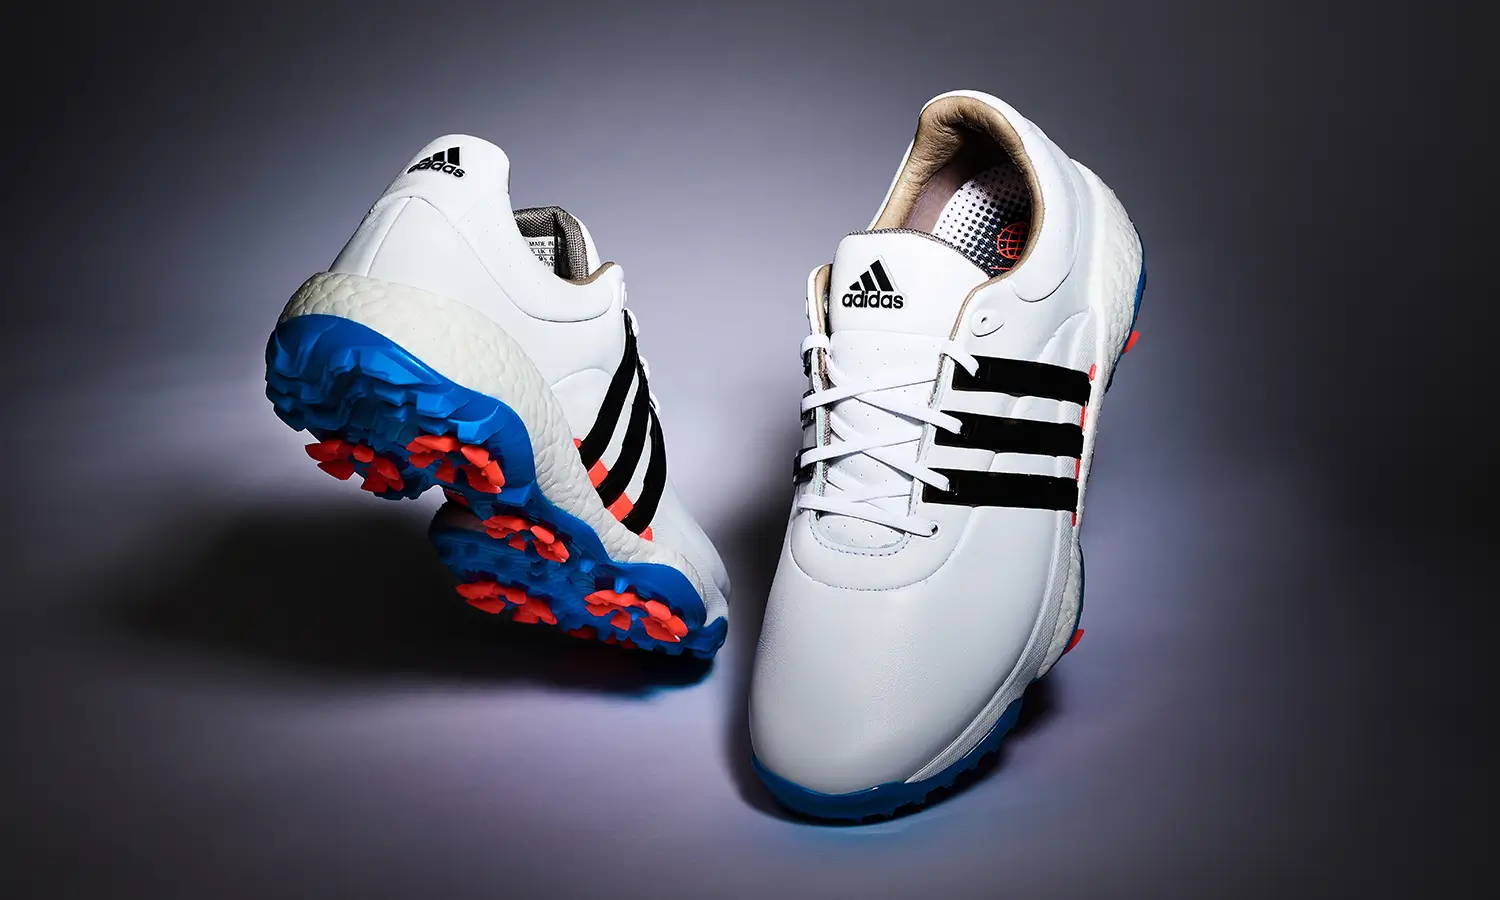 Adidas Golf Shoes Tablet